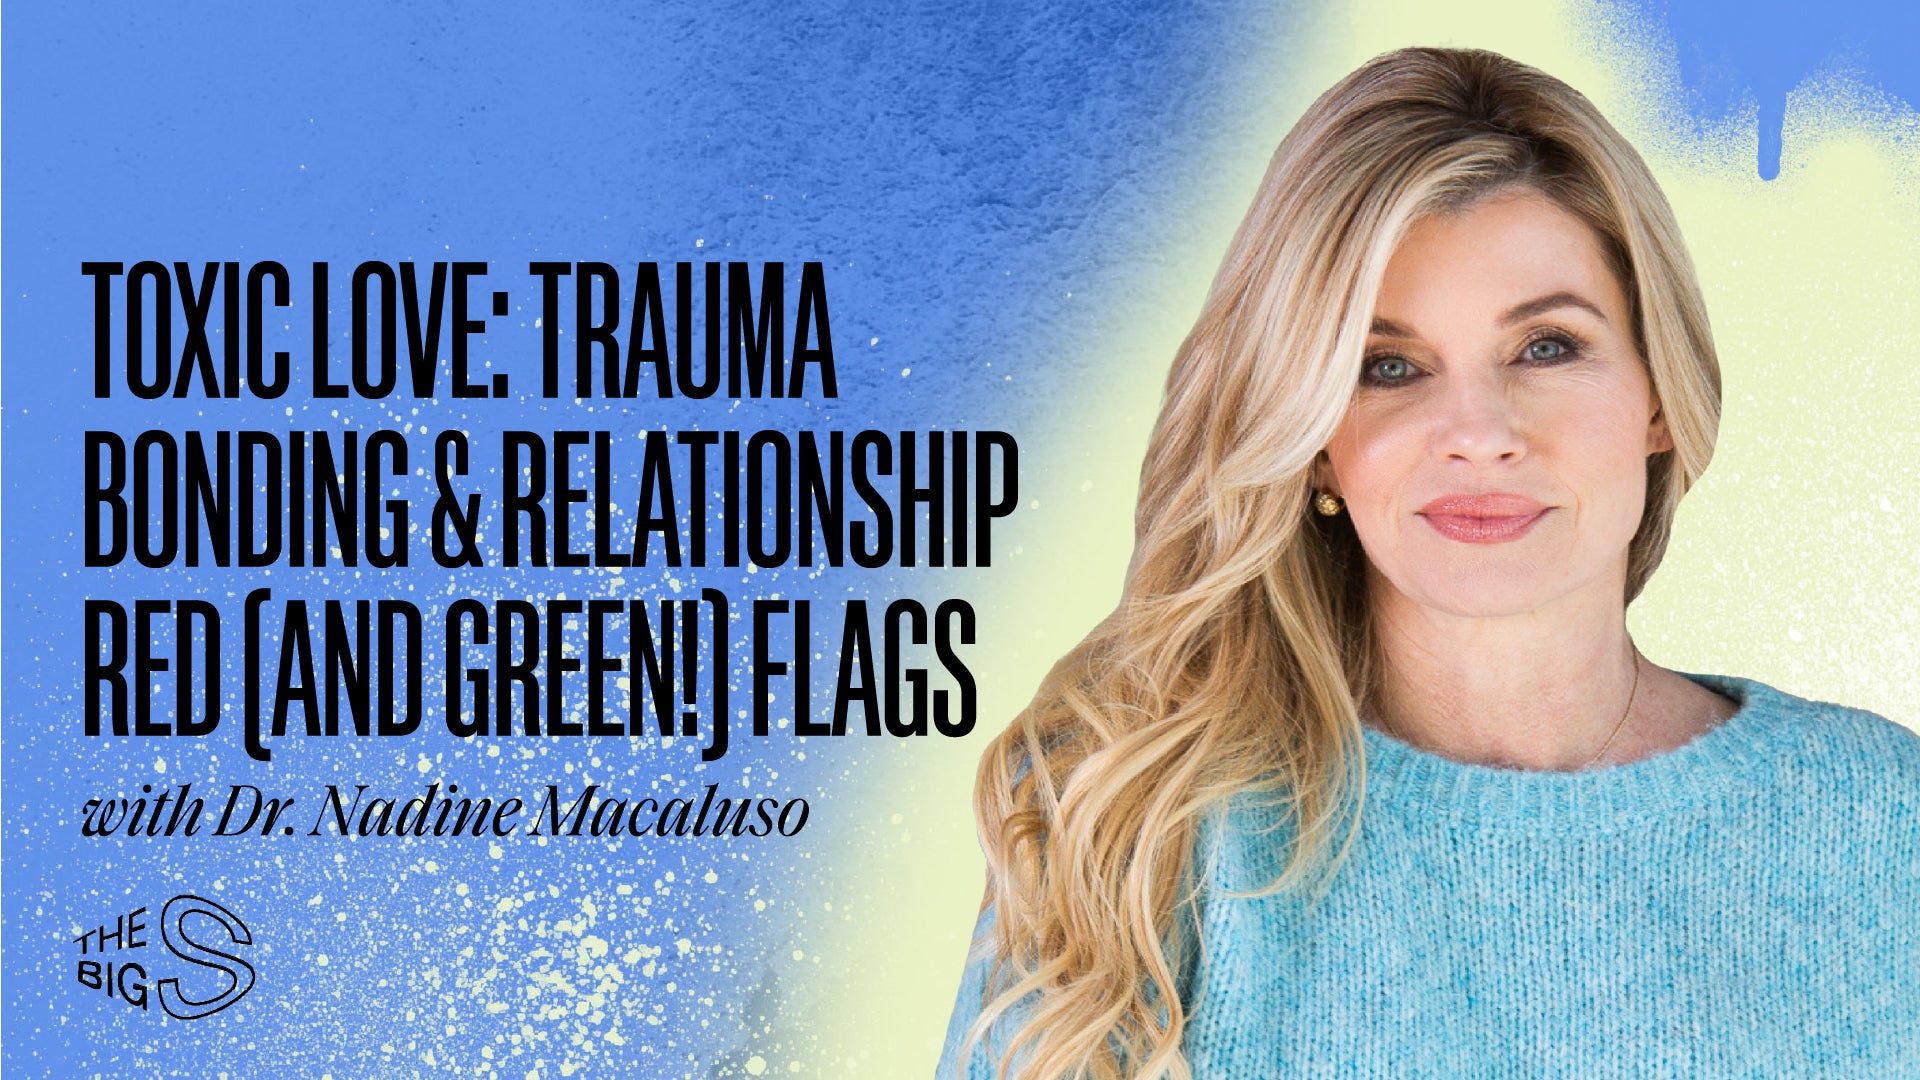 87. TOXIC LOVE: TRAUMA BONDING & RELATIONSHIP RED (AND GREEN!) FLAGS WITH DR. NADINE MACALUSO